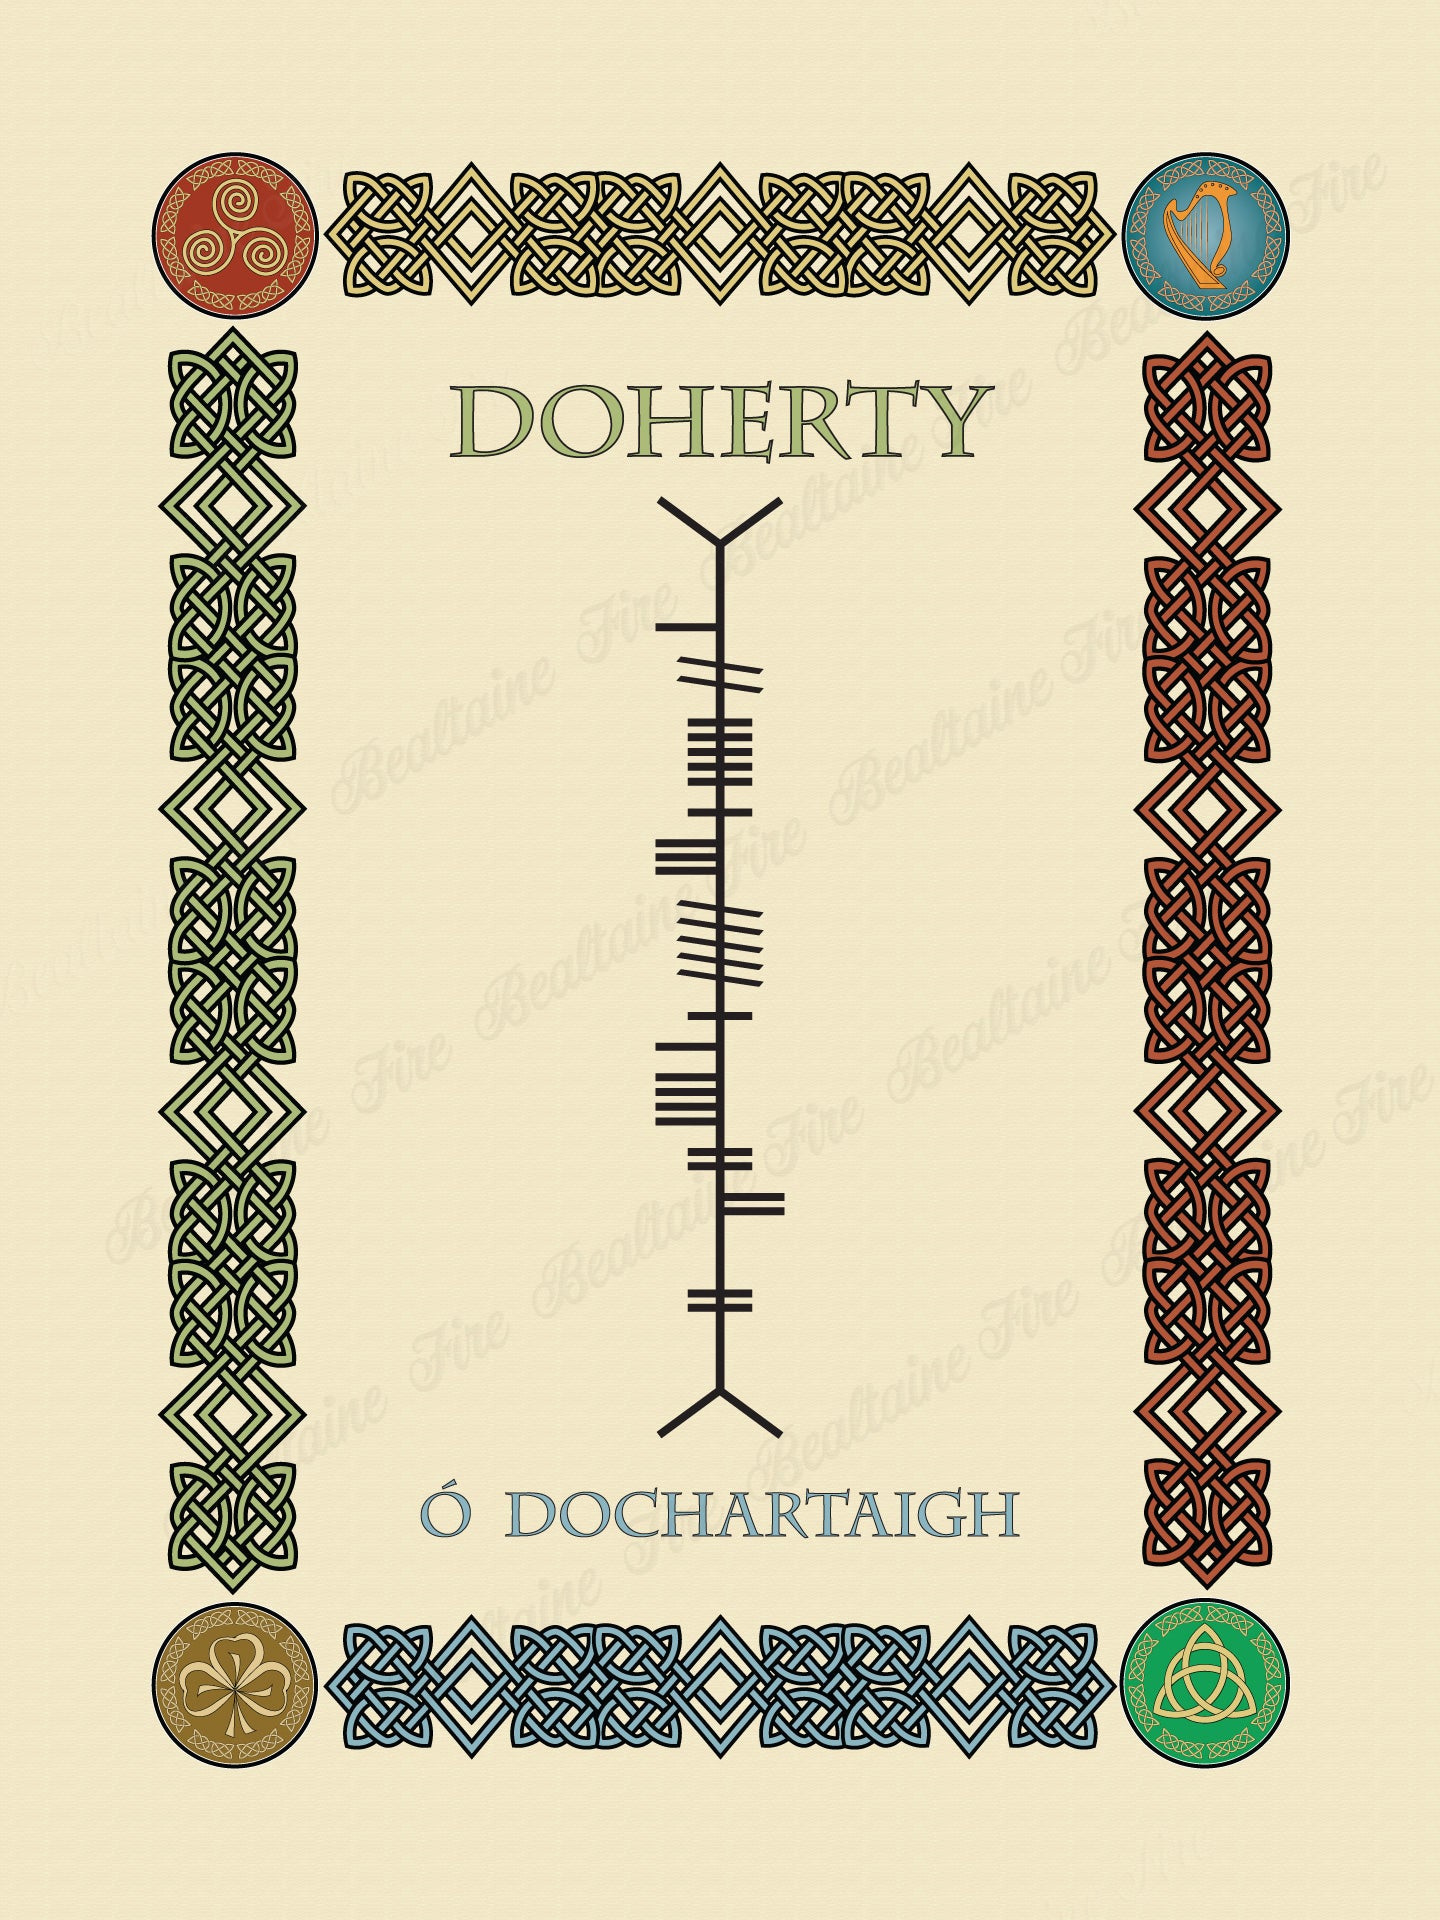 Doherty in Old Irish and Ogham - Premium luster unframed print